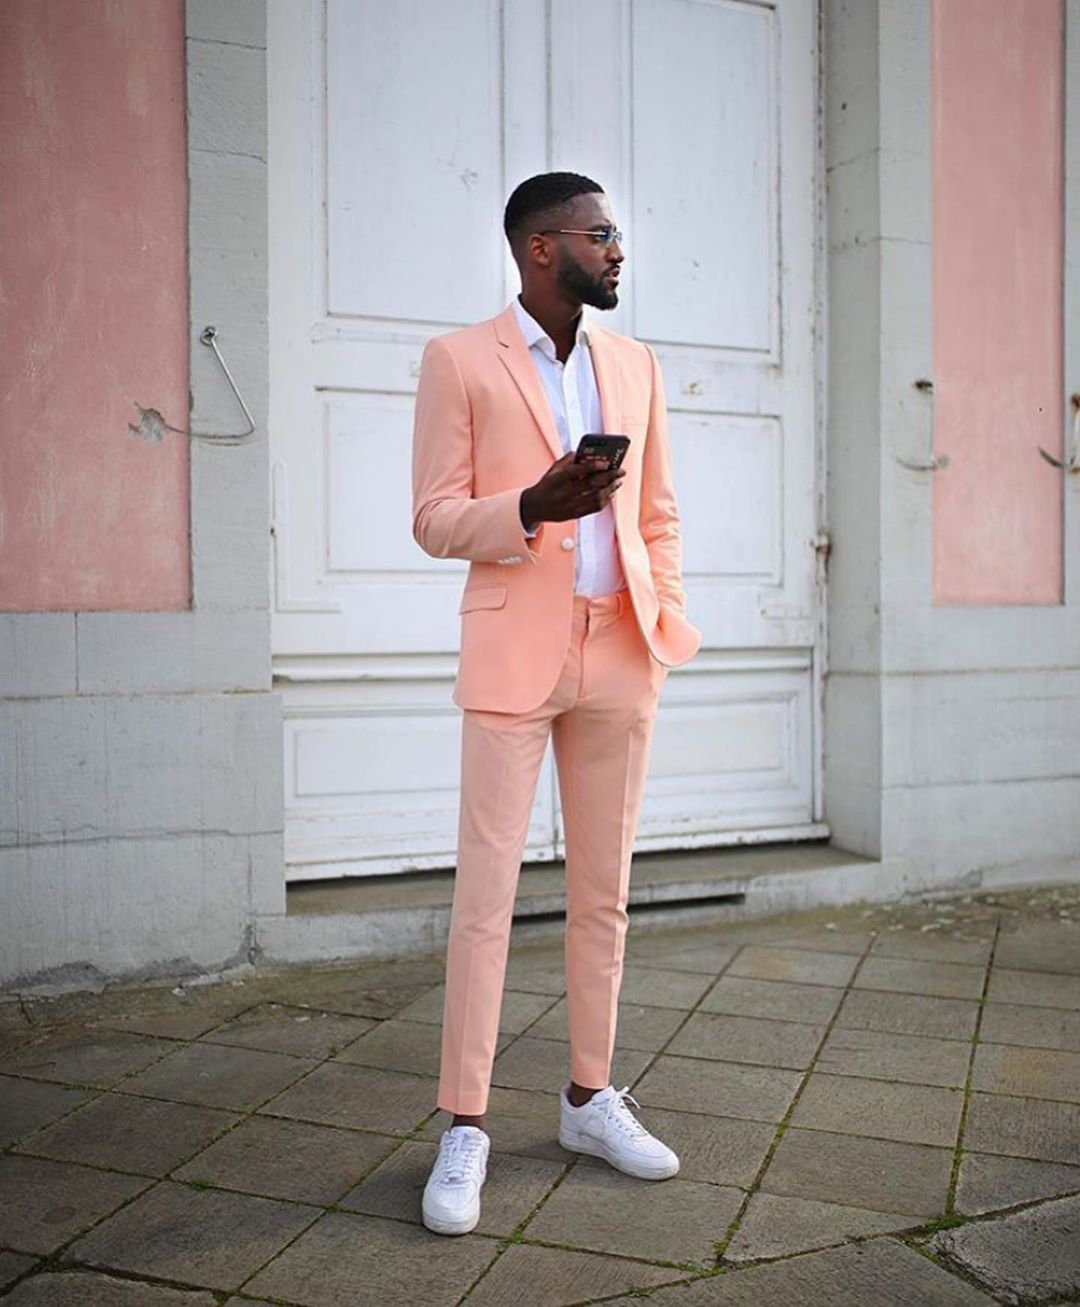 Best Dressed Of The Week, Week Of May 10th: Who Killed It In The Style ...